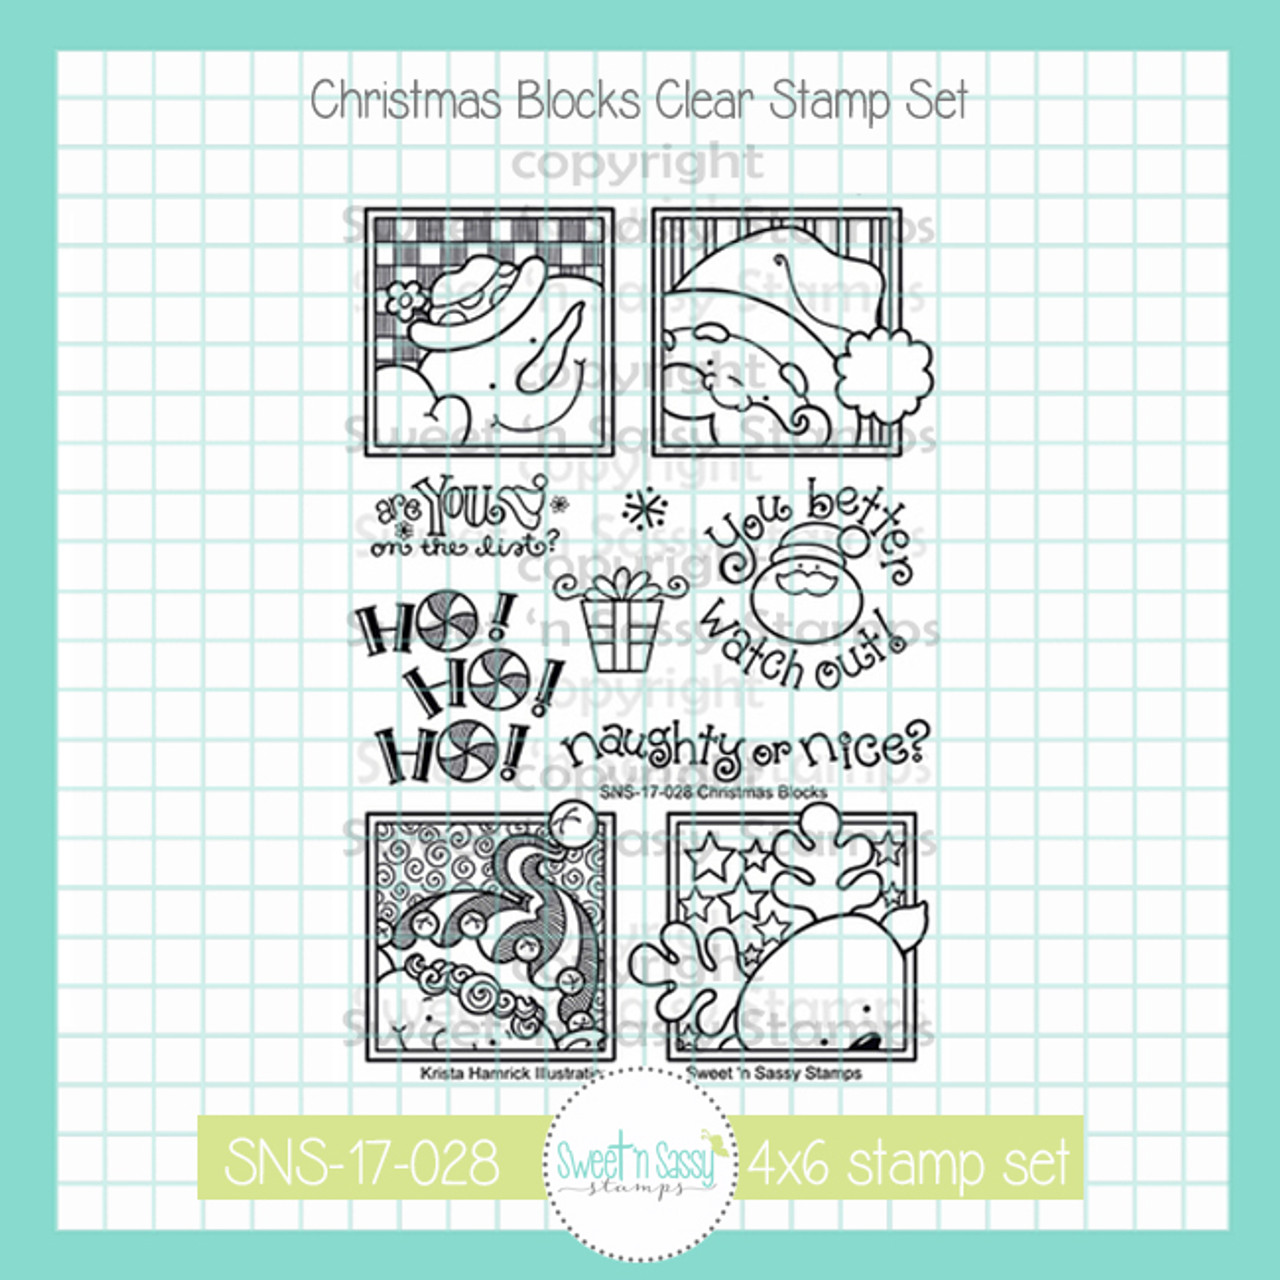 9 Festive Holiday Inchie Clear Stamps, Plus Stamp Block / Inkadinkado –